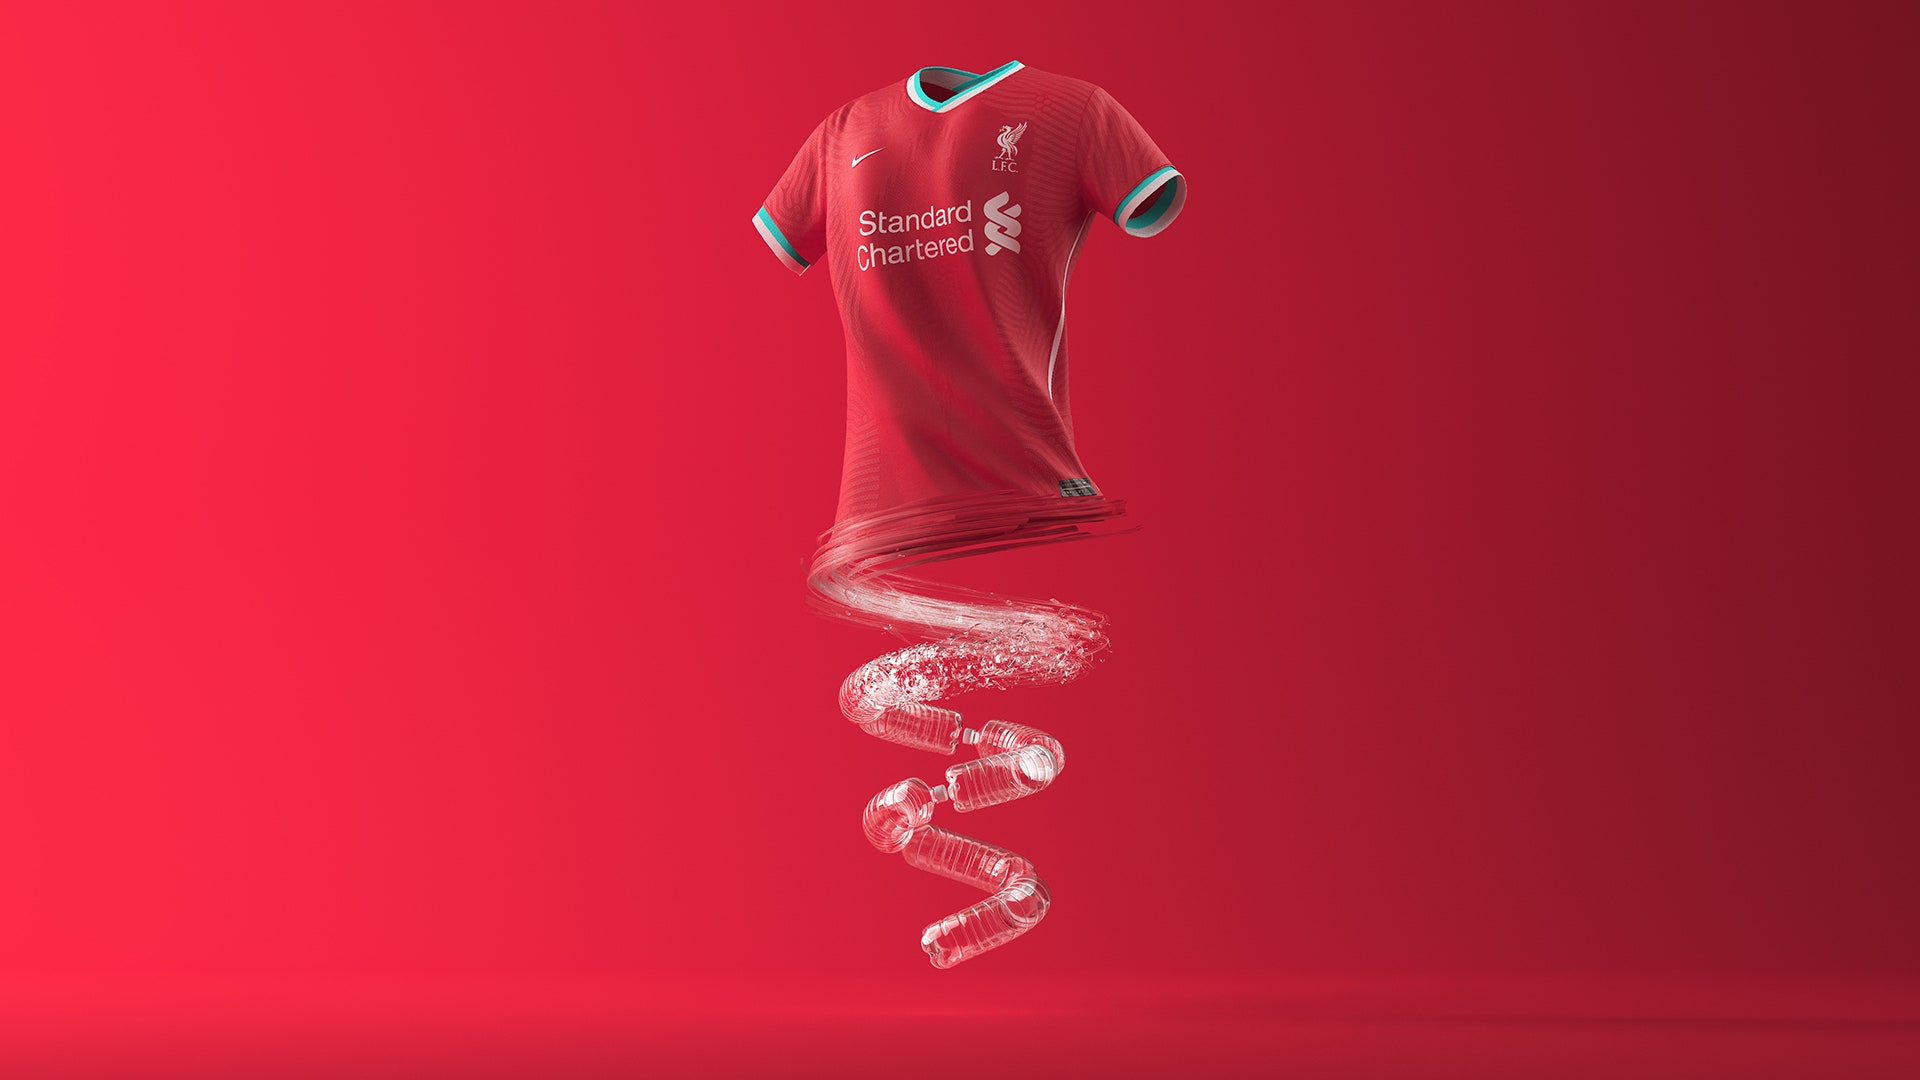 Liverpool Kit Wallpaper 2021 / Pin On Kit Wallpaper 2020 21, All goalkeeper kits are also included